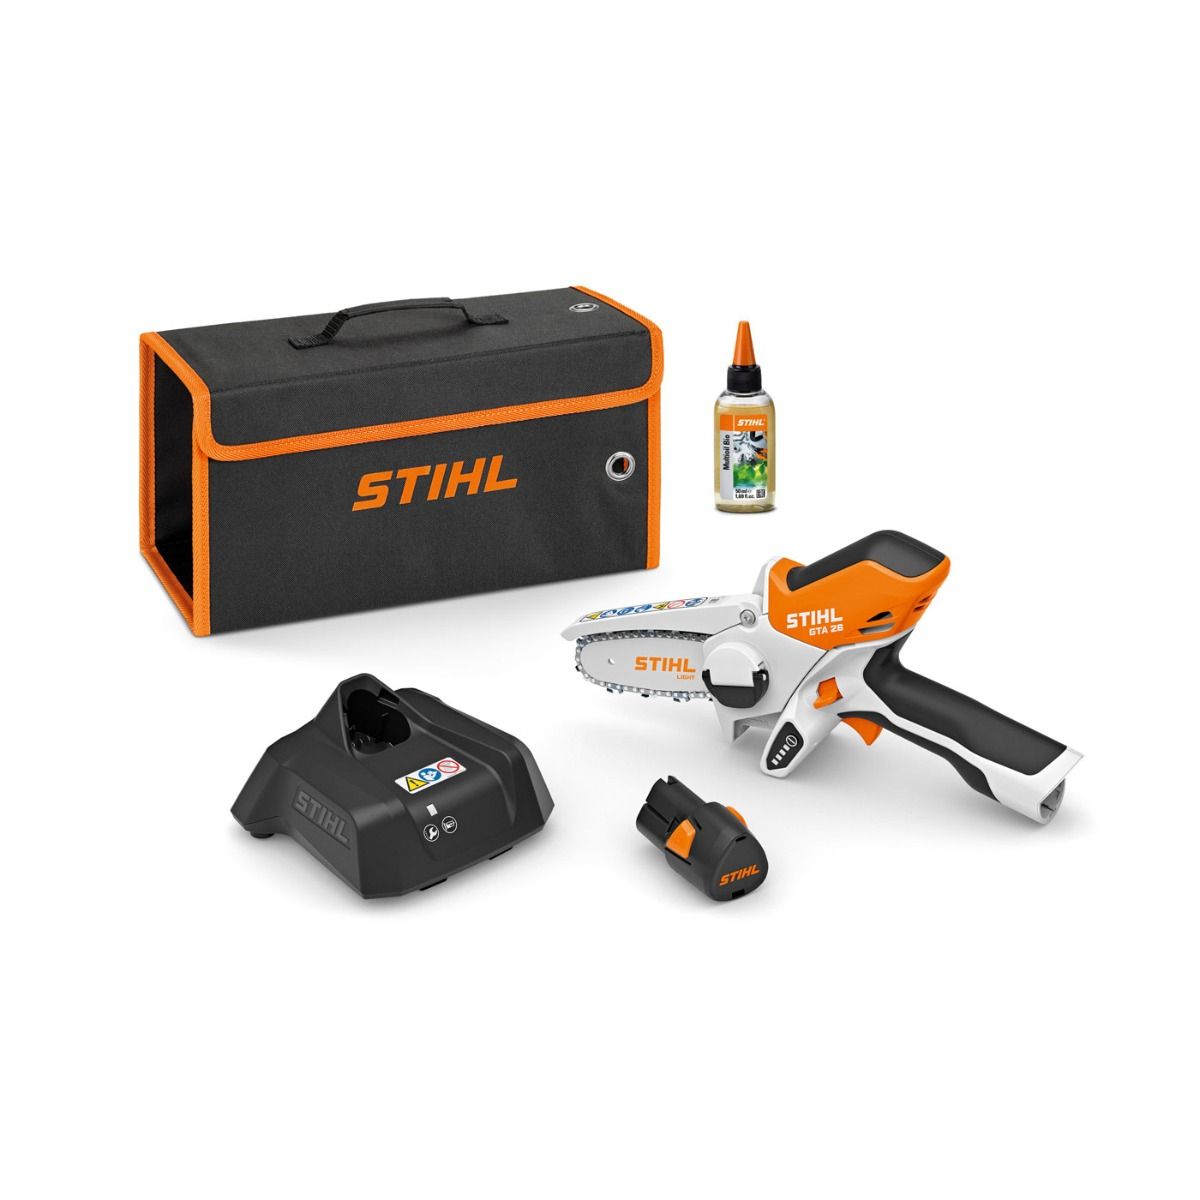 Stihl Compact Cordless Power System review